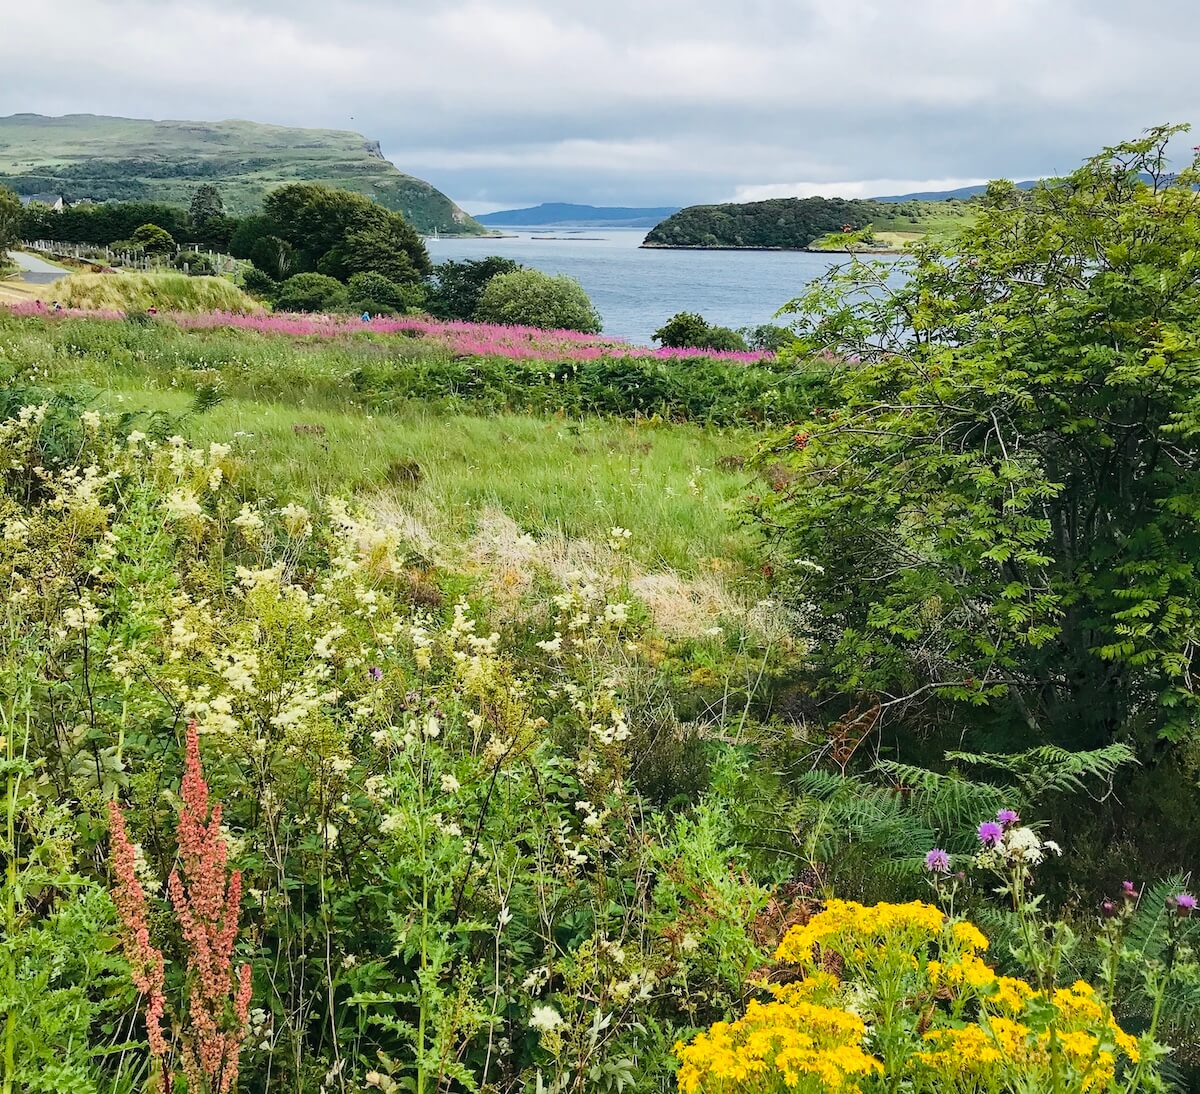 A picturesque view from a road on the Isle of Skye, with a vibrant range of wildflowers including pink heather and yellow gorse. In the distance, the calm sea meets the sky, framed by rolling hills and a small island, under a partly cloudy sky.